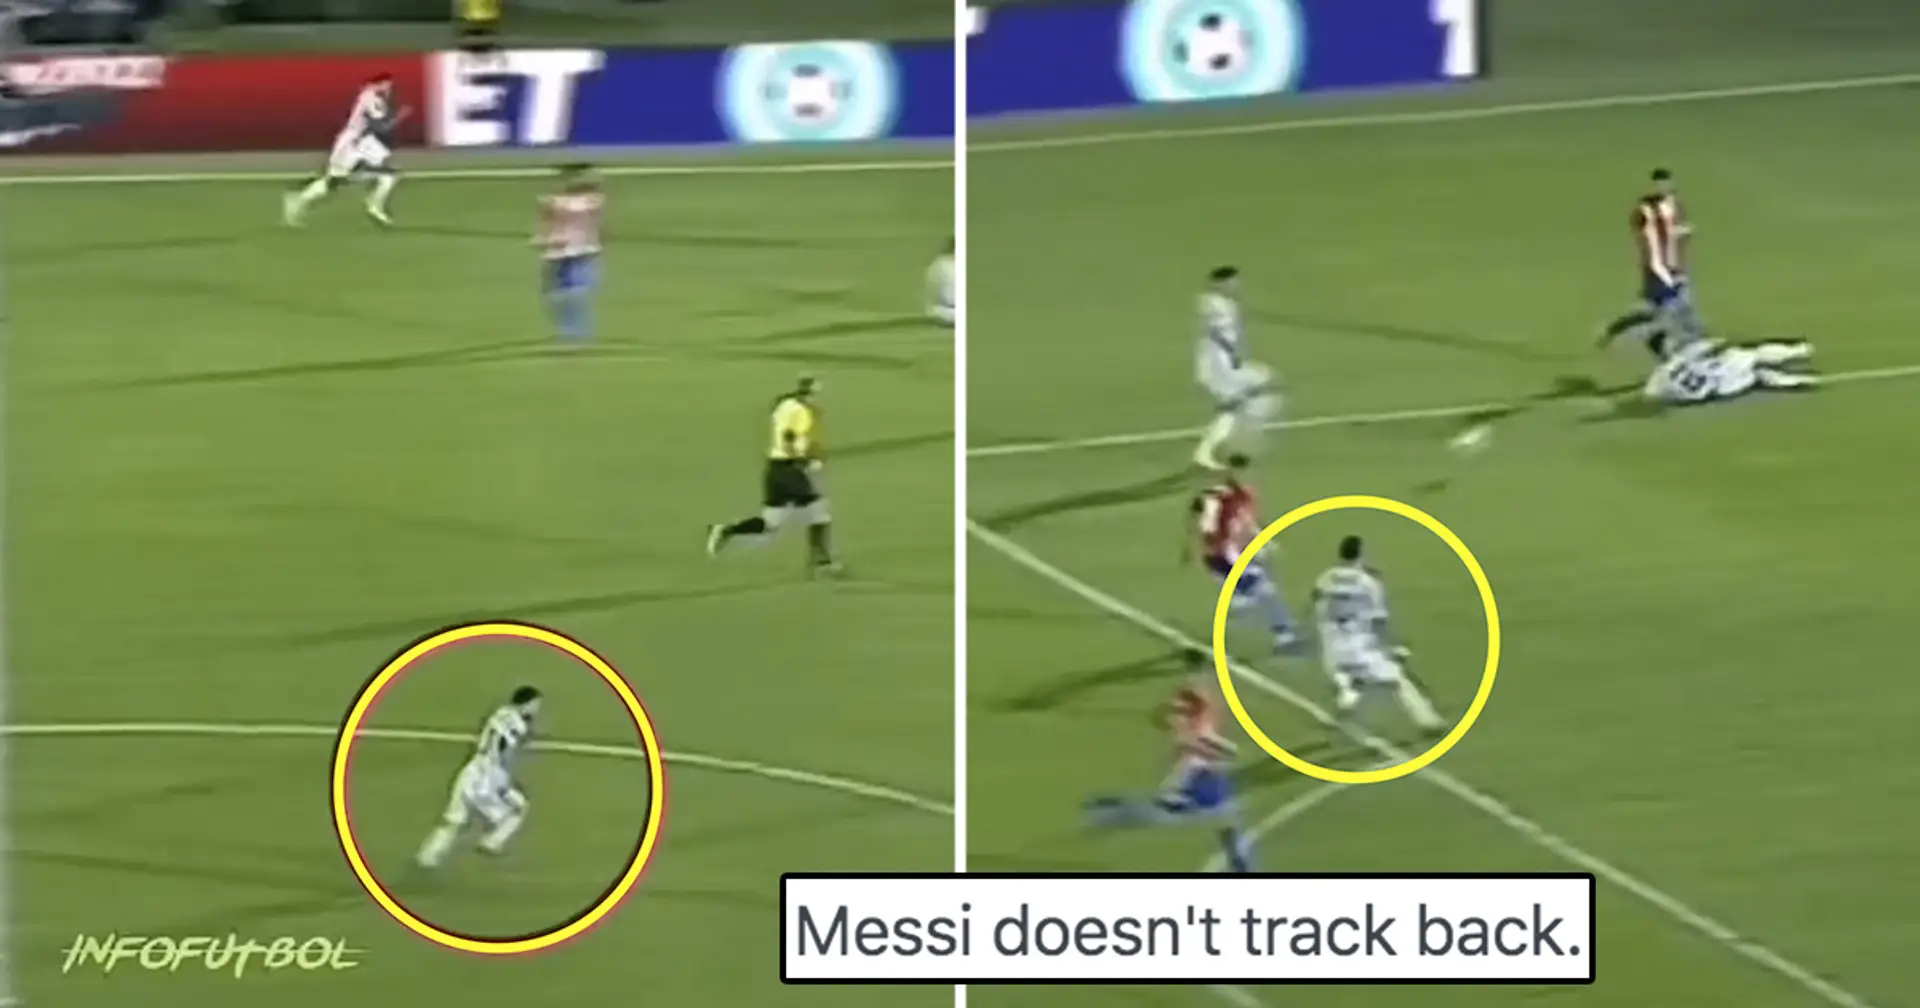 Messi busts 'he doesn't track back' myth with one classy move in Paraguay game